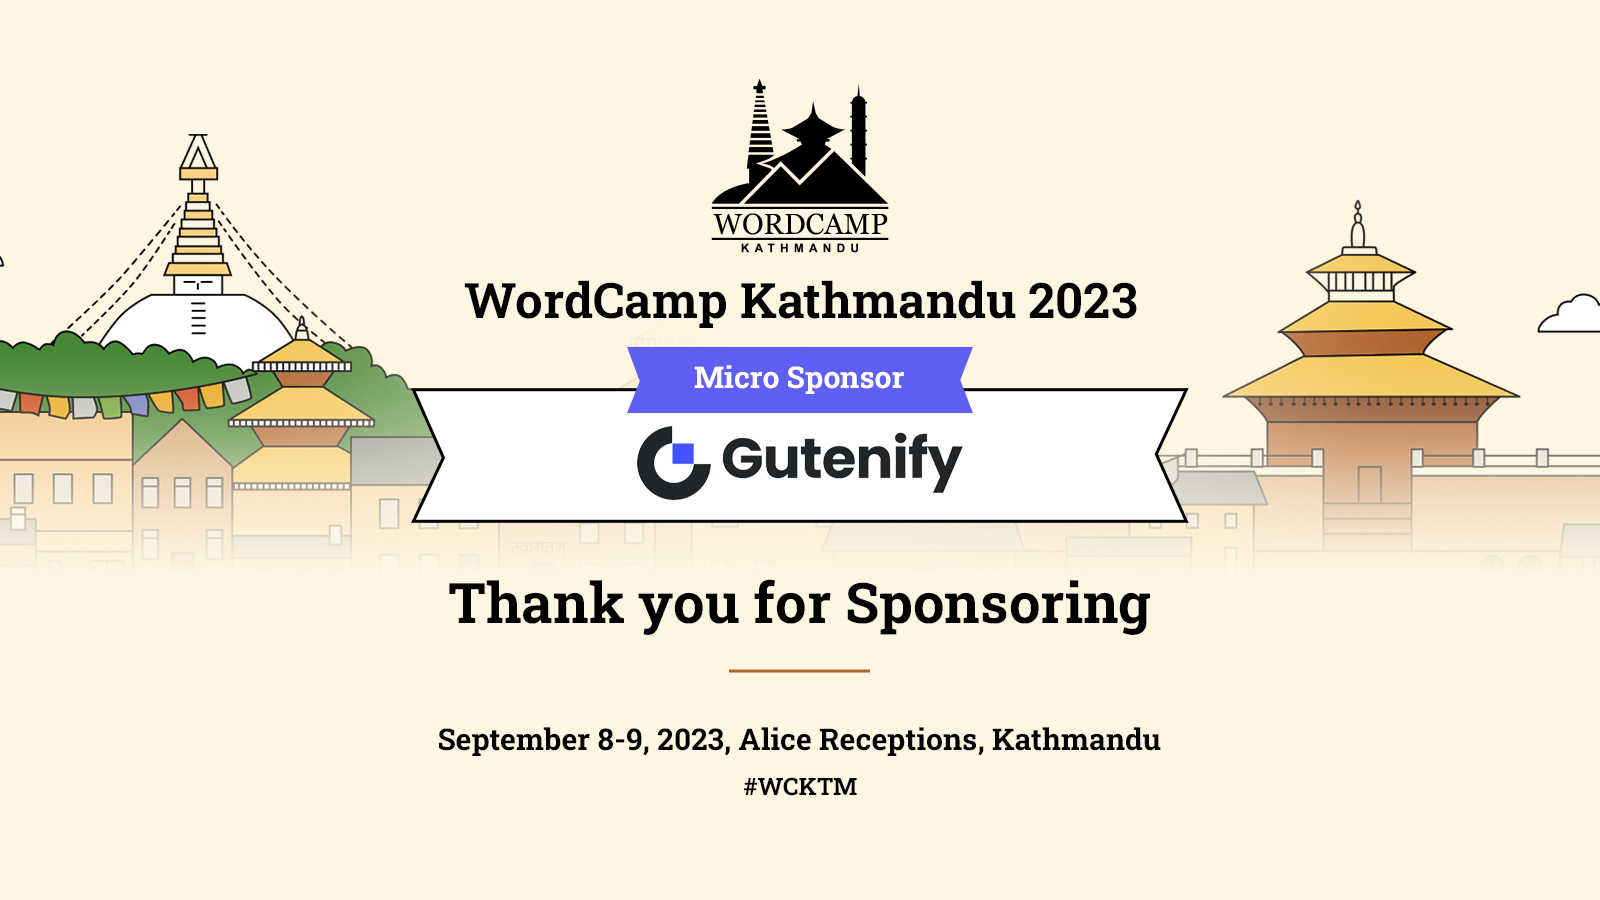 Thank you Gutenify for sponsoring